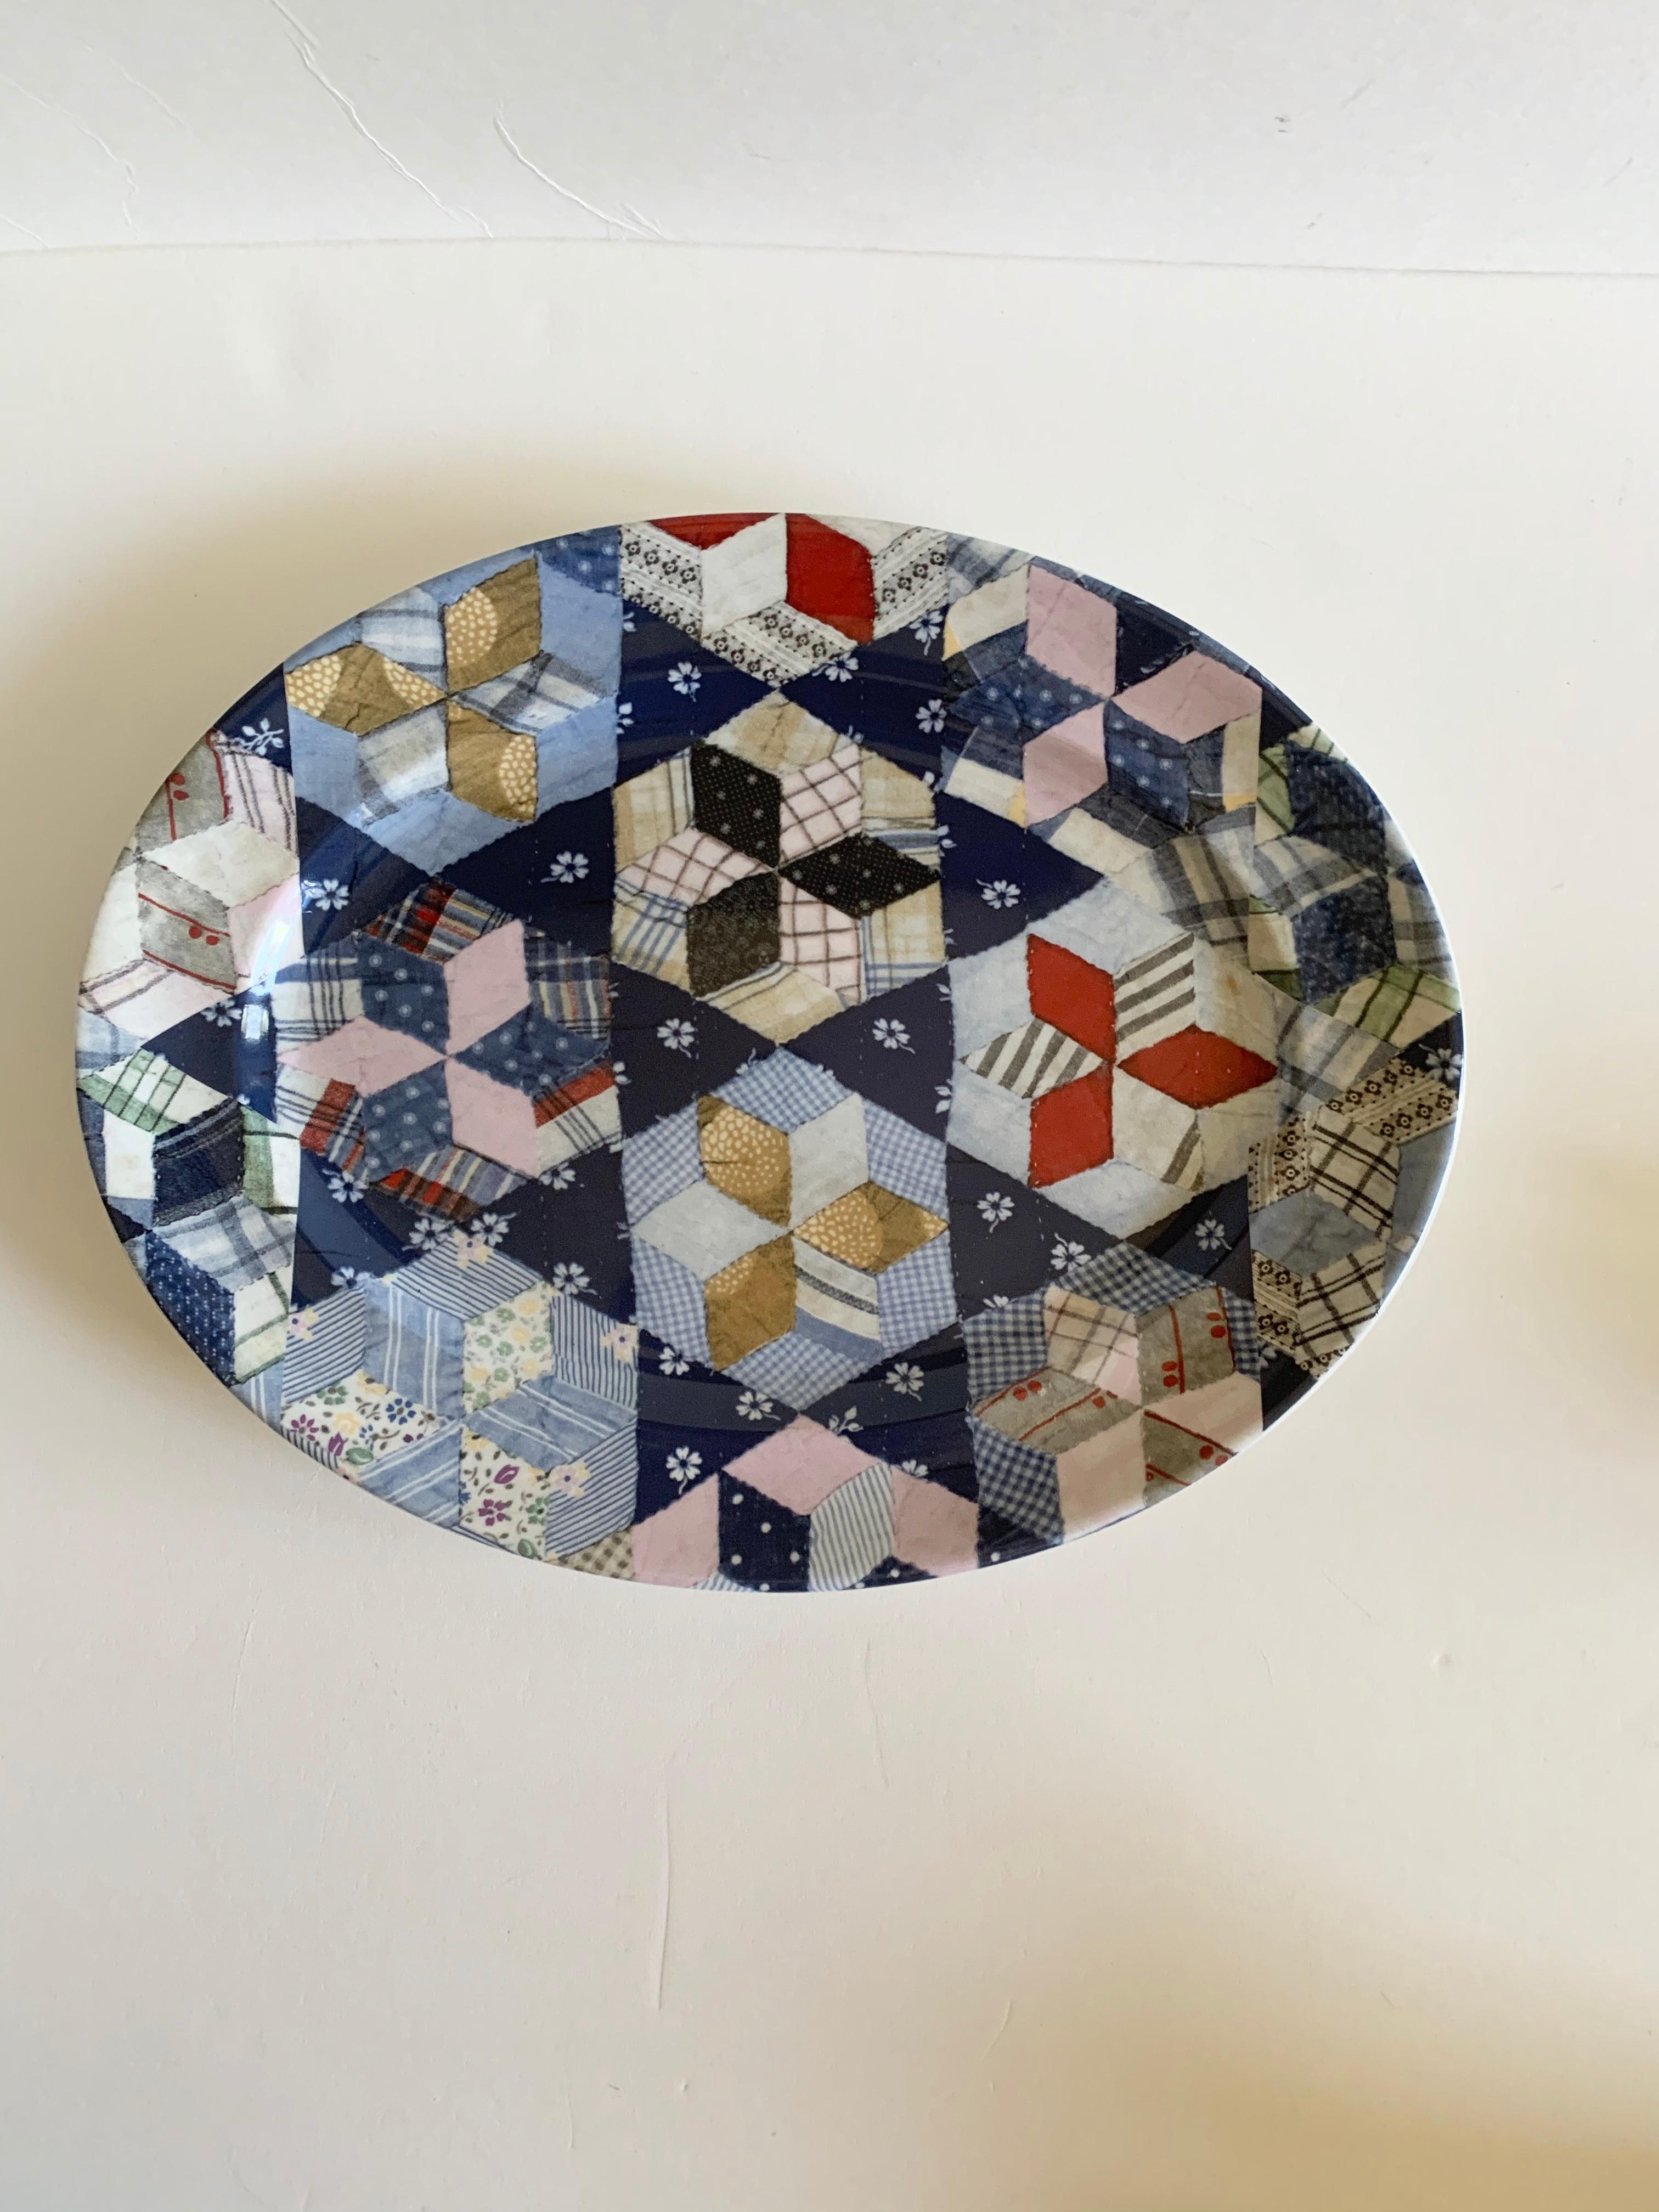 A six-piece serving set in the Patchwork pattern by Wedgwood for Ralph Lauren. Made in England, circa 1990.

This rare and out of production pattern features a blue/white/pink/multi-color pattern evocative of Americana antique quilts. Each piece is